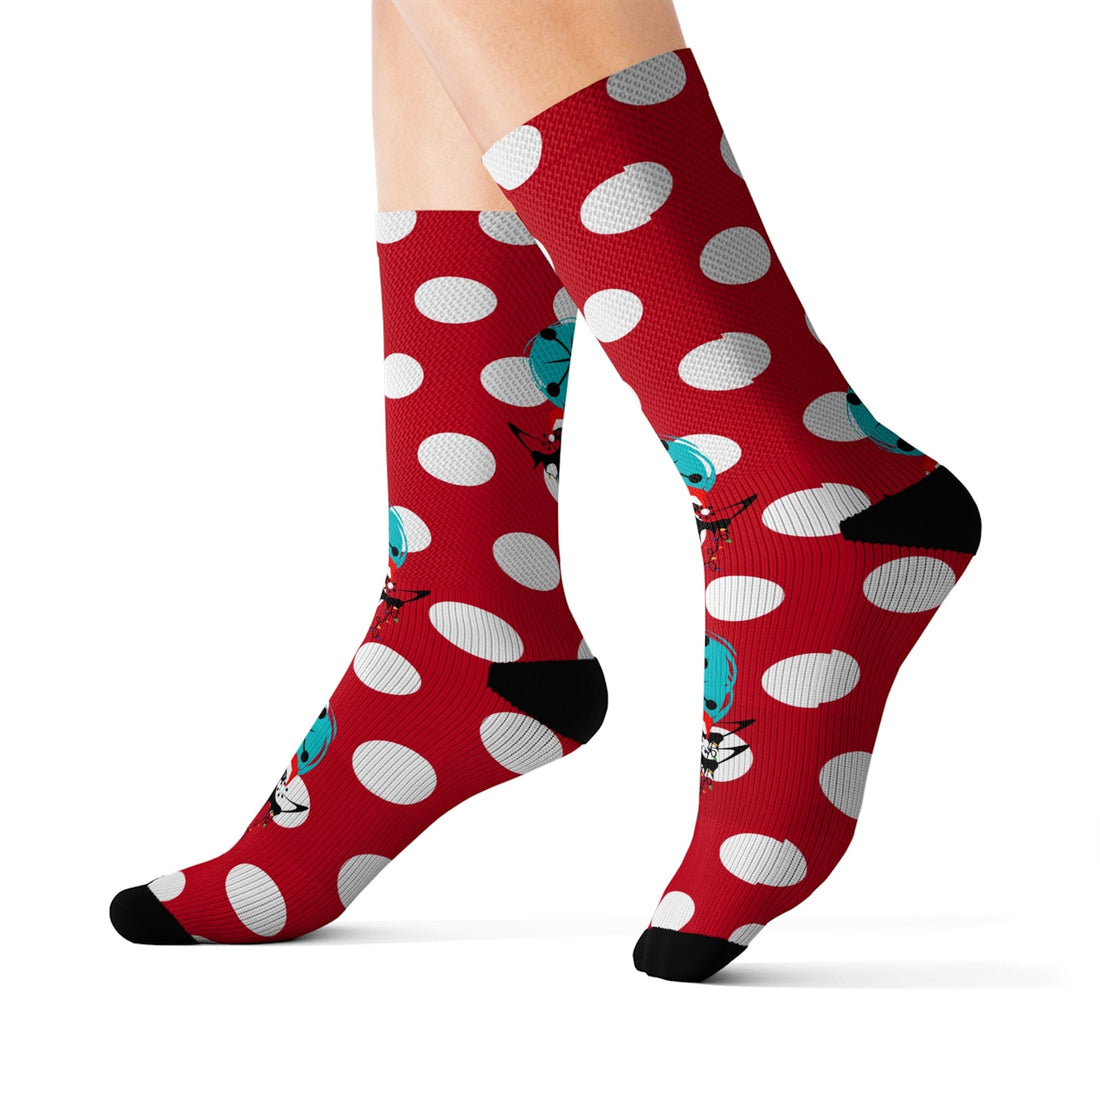 Christmas Socks, Red White, Polka Dot and Kitschy Crazy Atomic Cats  Socks All Over Prints L